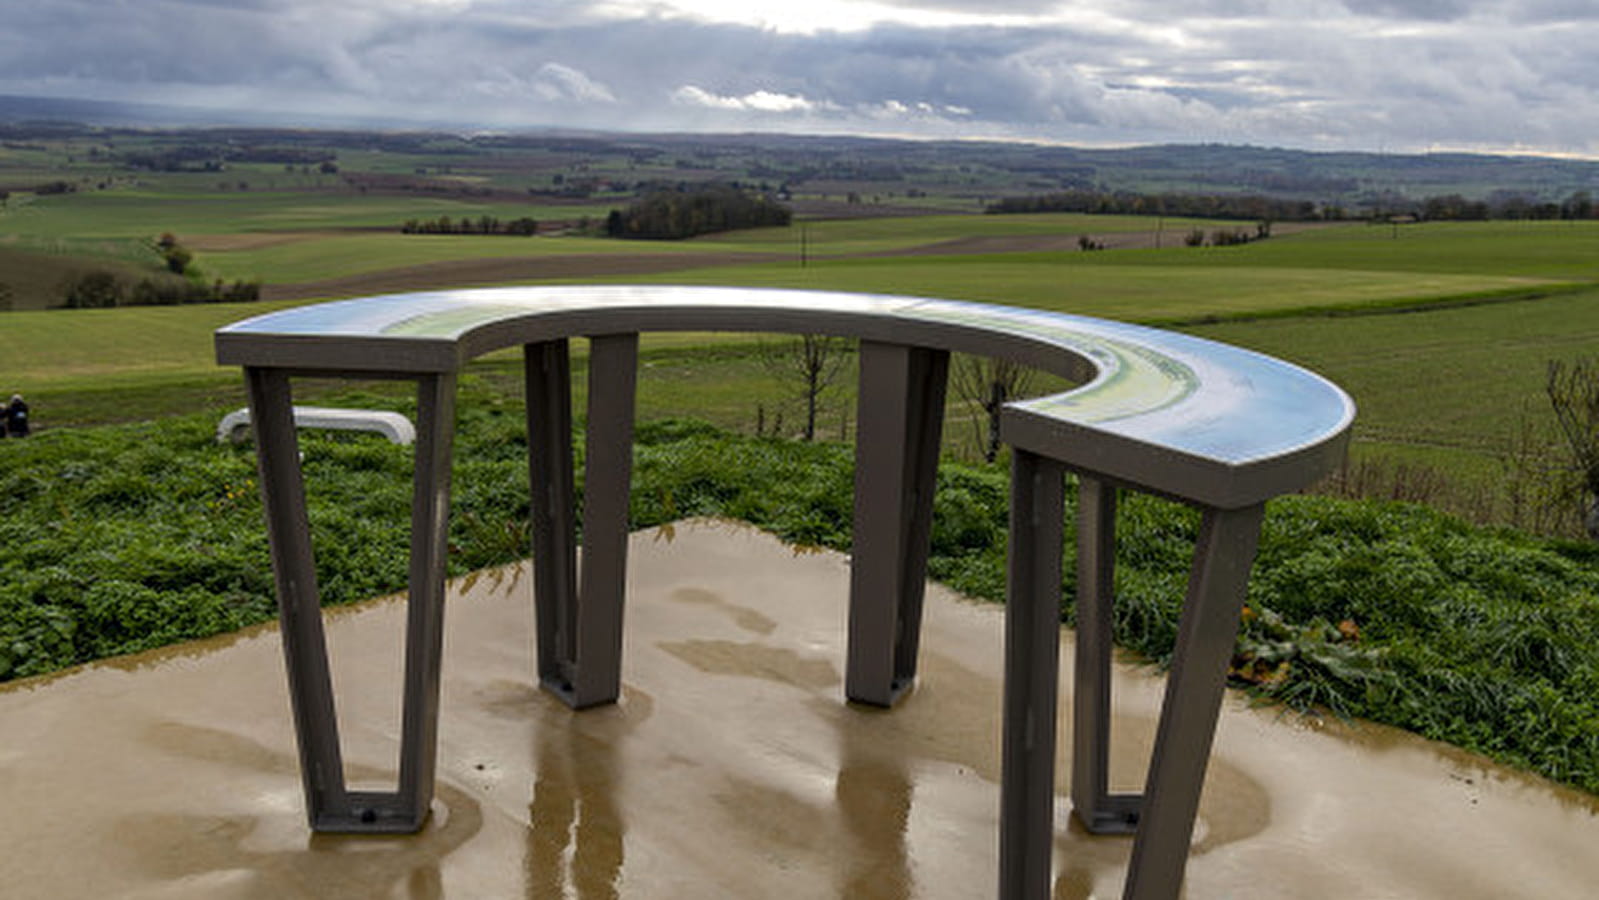  Panoramas and orientation table at Perreuse